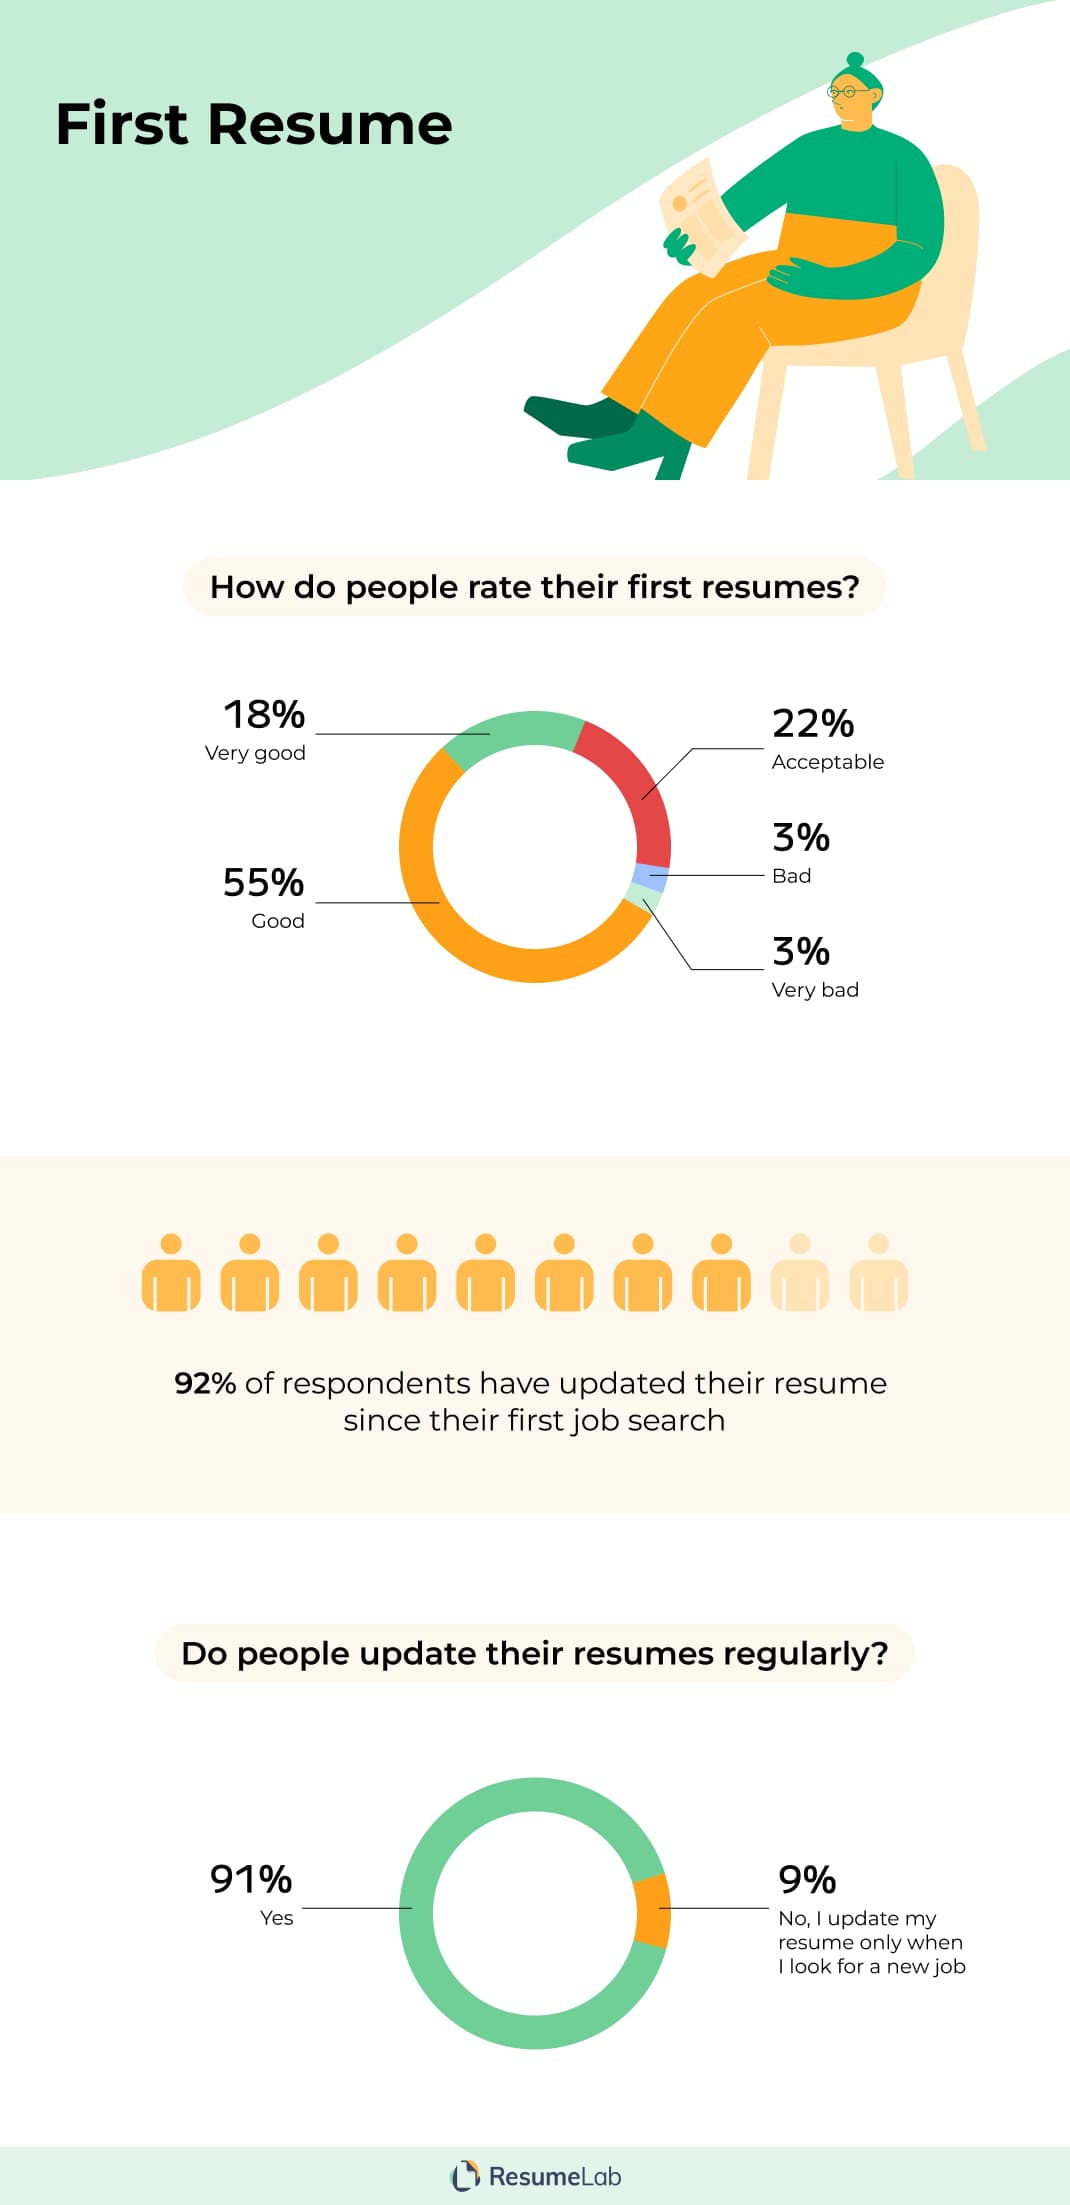 How do people rate their first resumes?